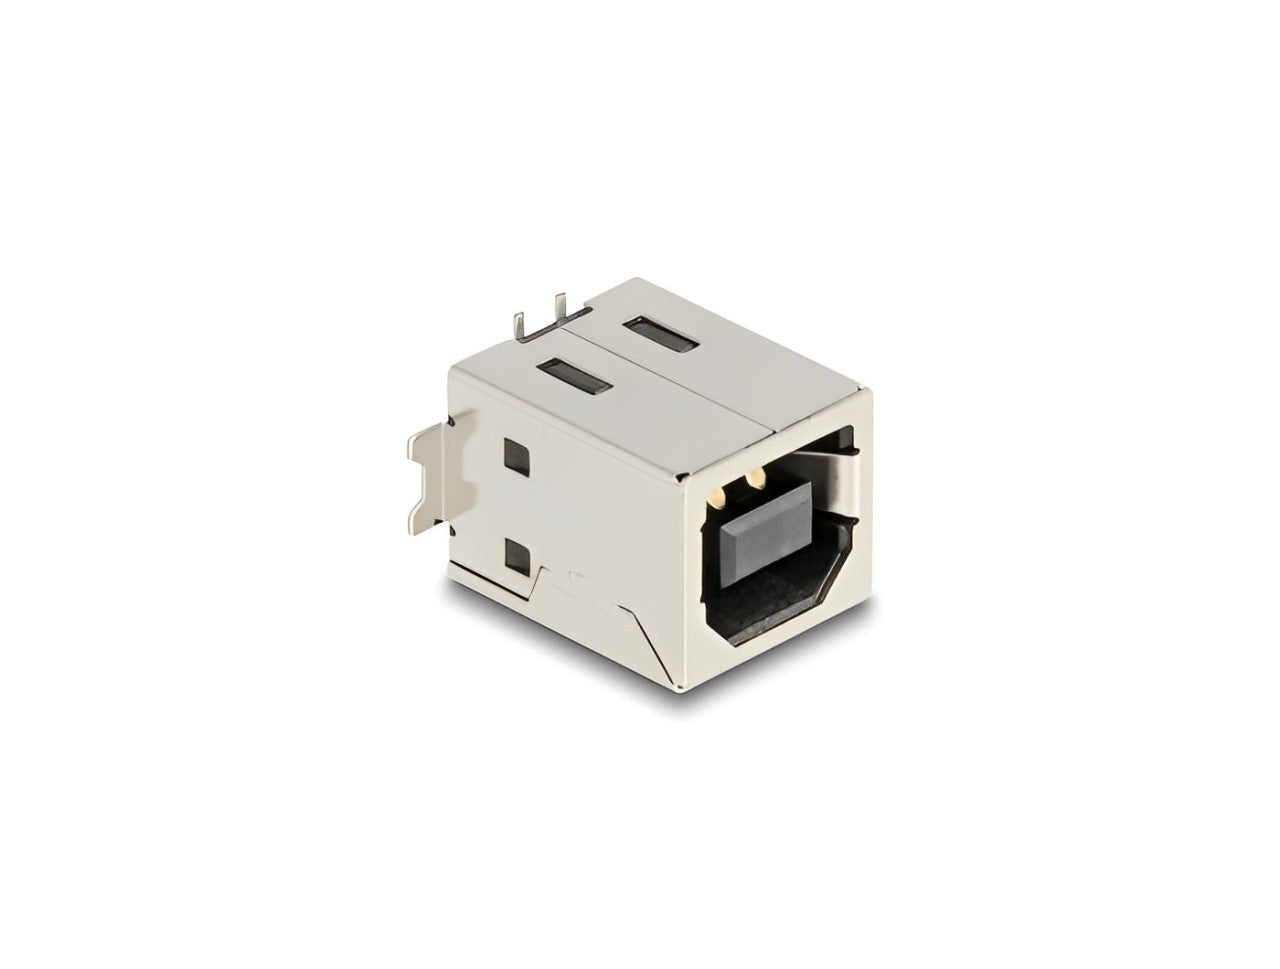 Delock USB 2.0 Type-B female 4 pin SMD connector for solder mounting 10 pieces - delock.israel